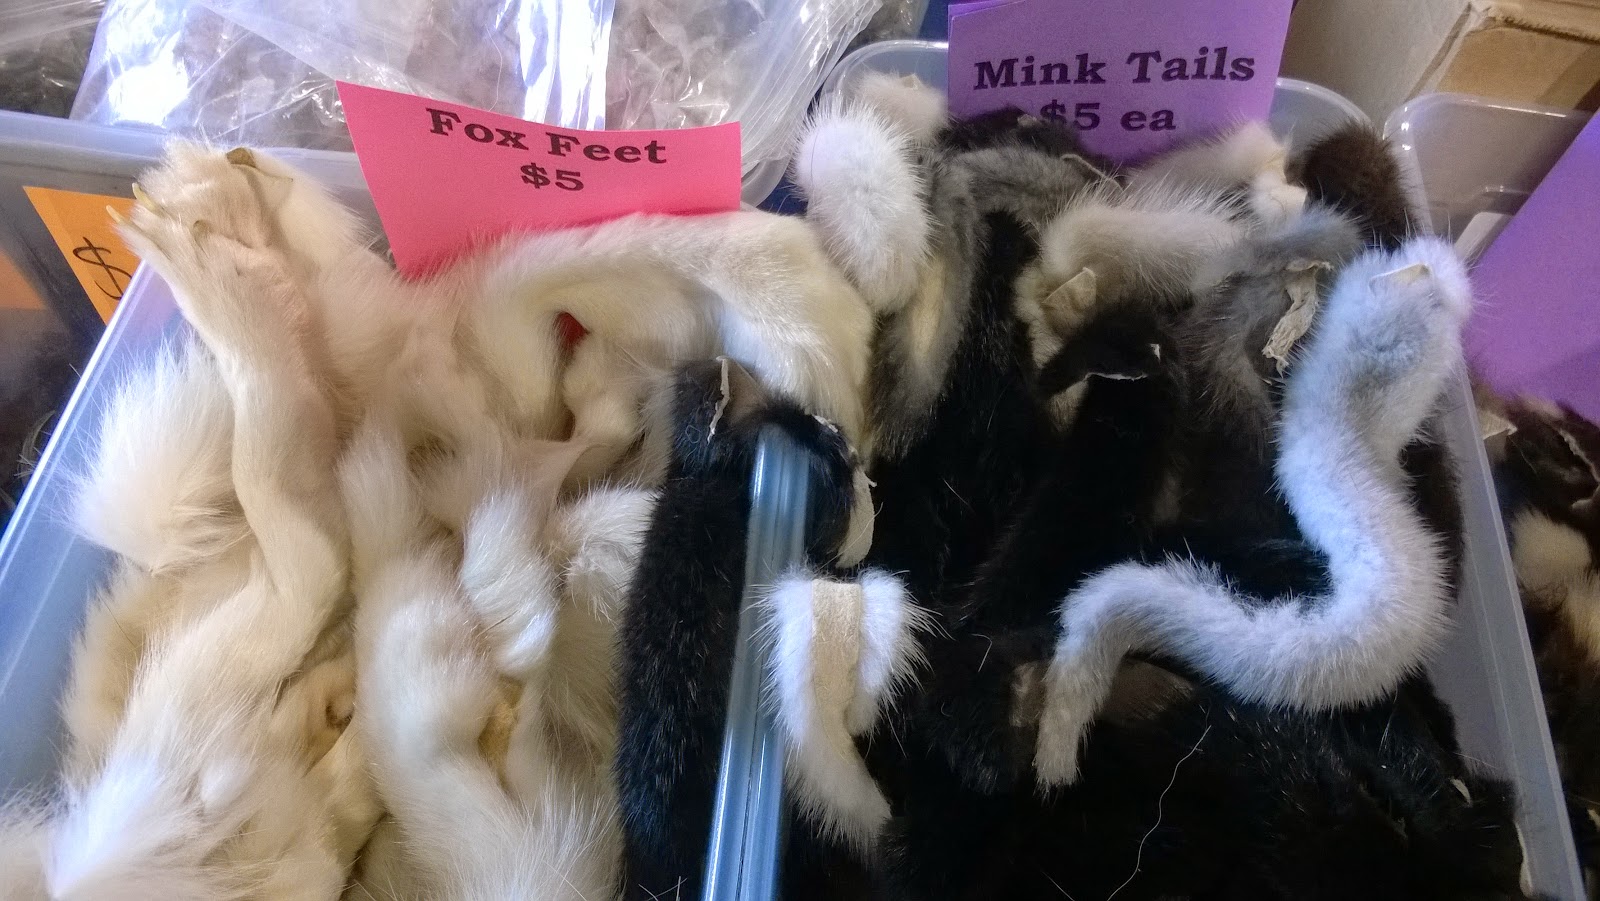 Fox feet and mink tails